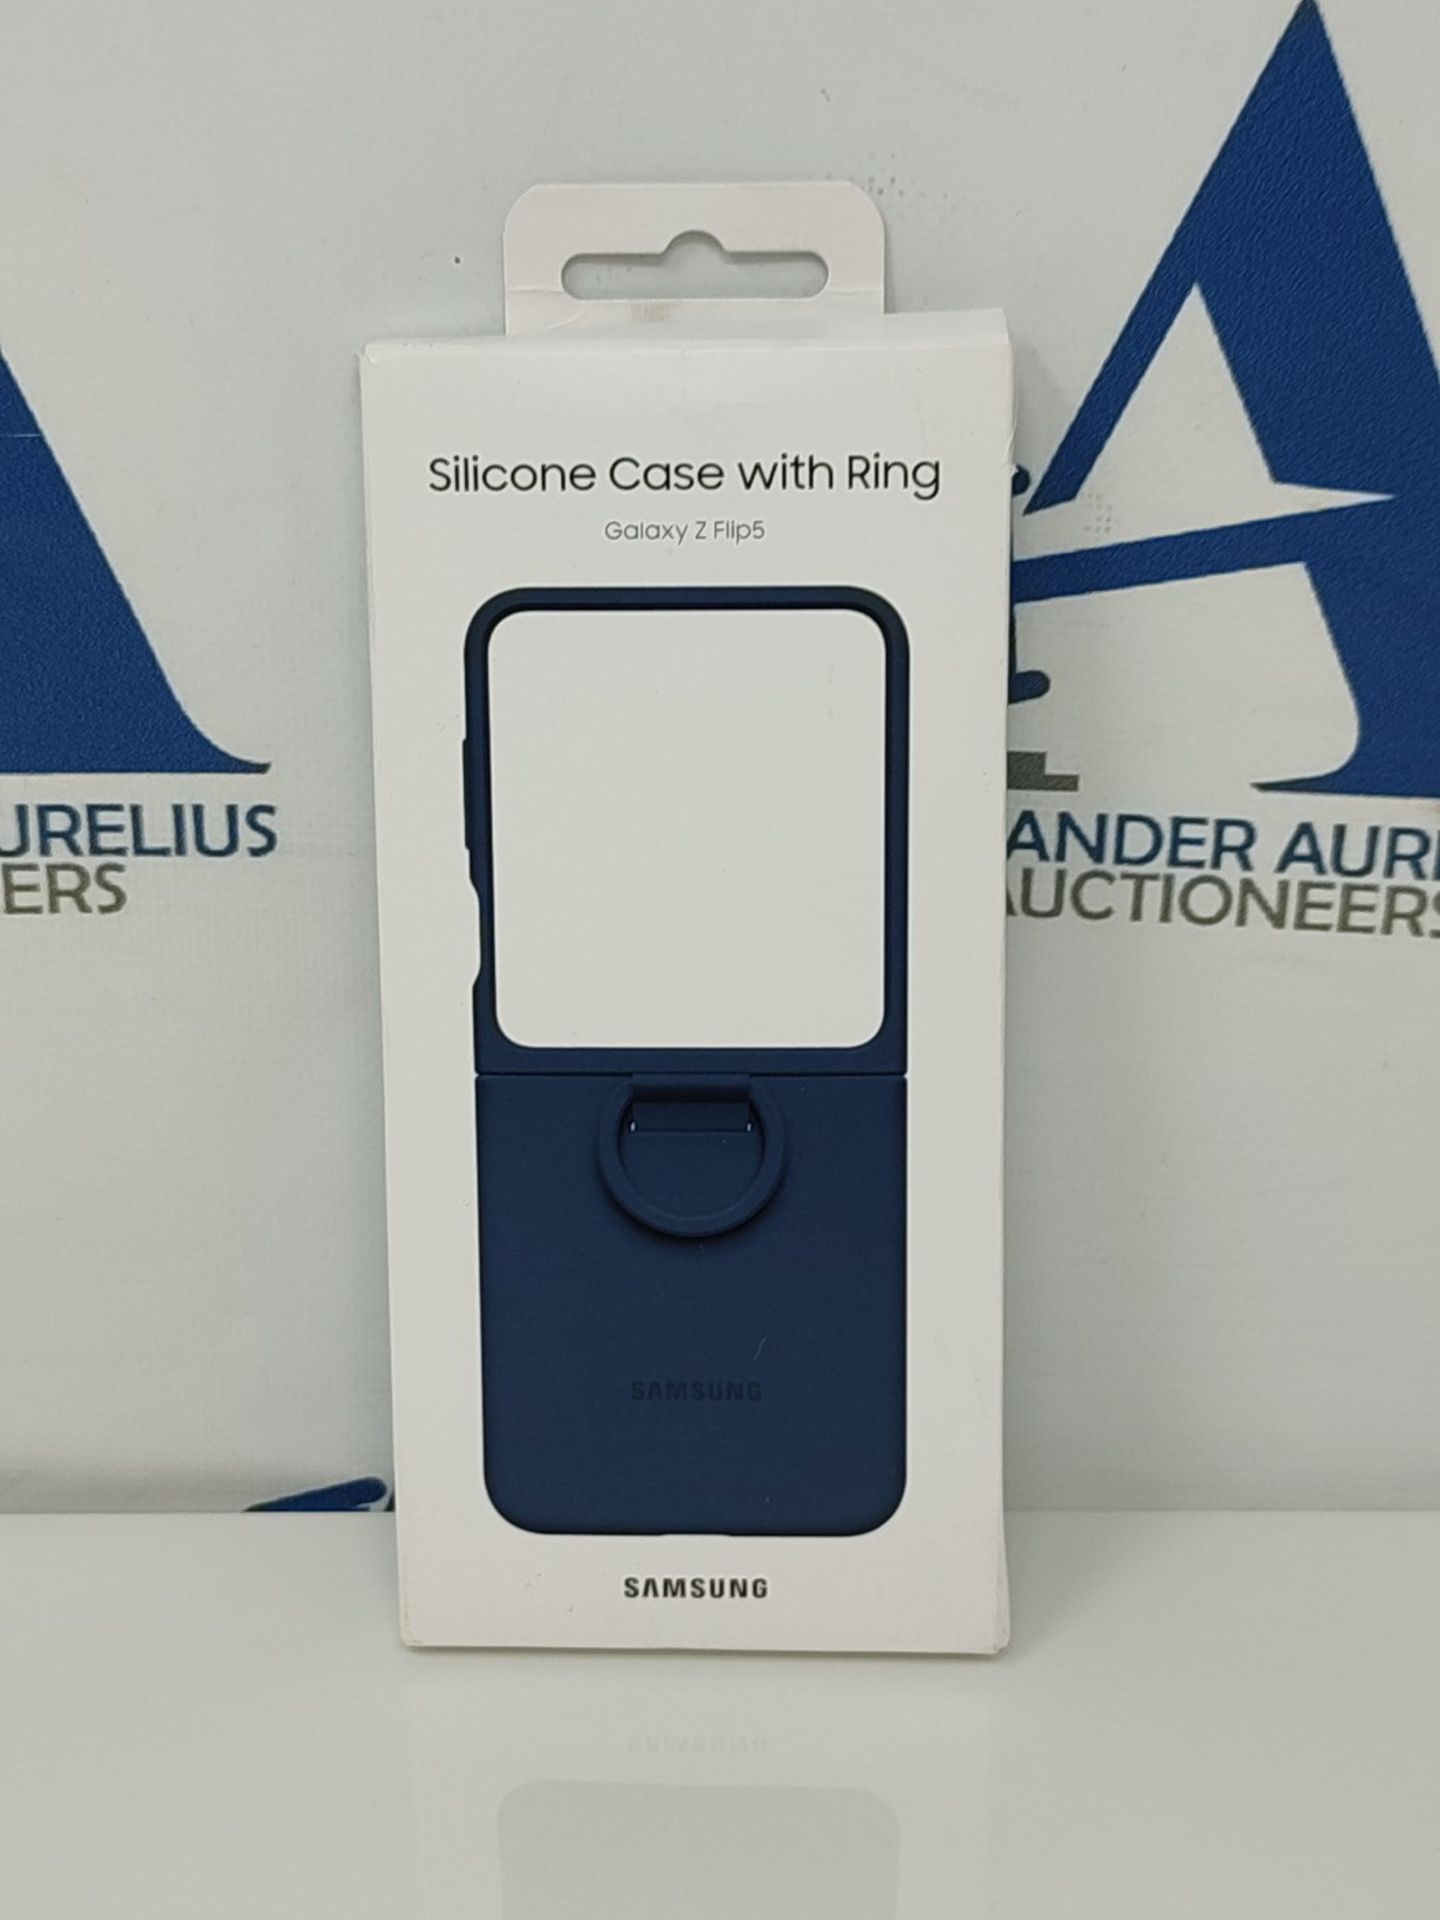 Samsung Galaxy Official Silicone Case with Ring for Z Flip5, Indigo - Image 2 of 3